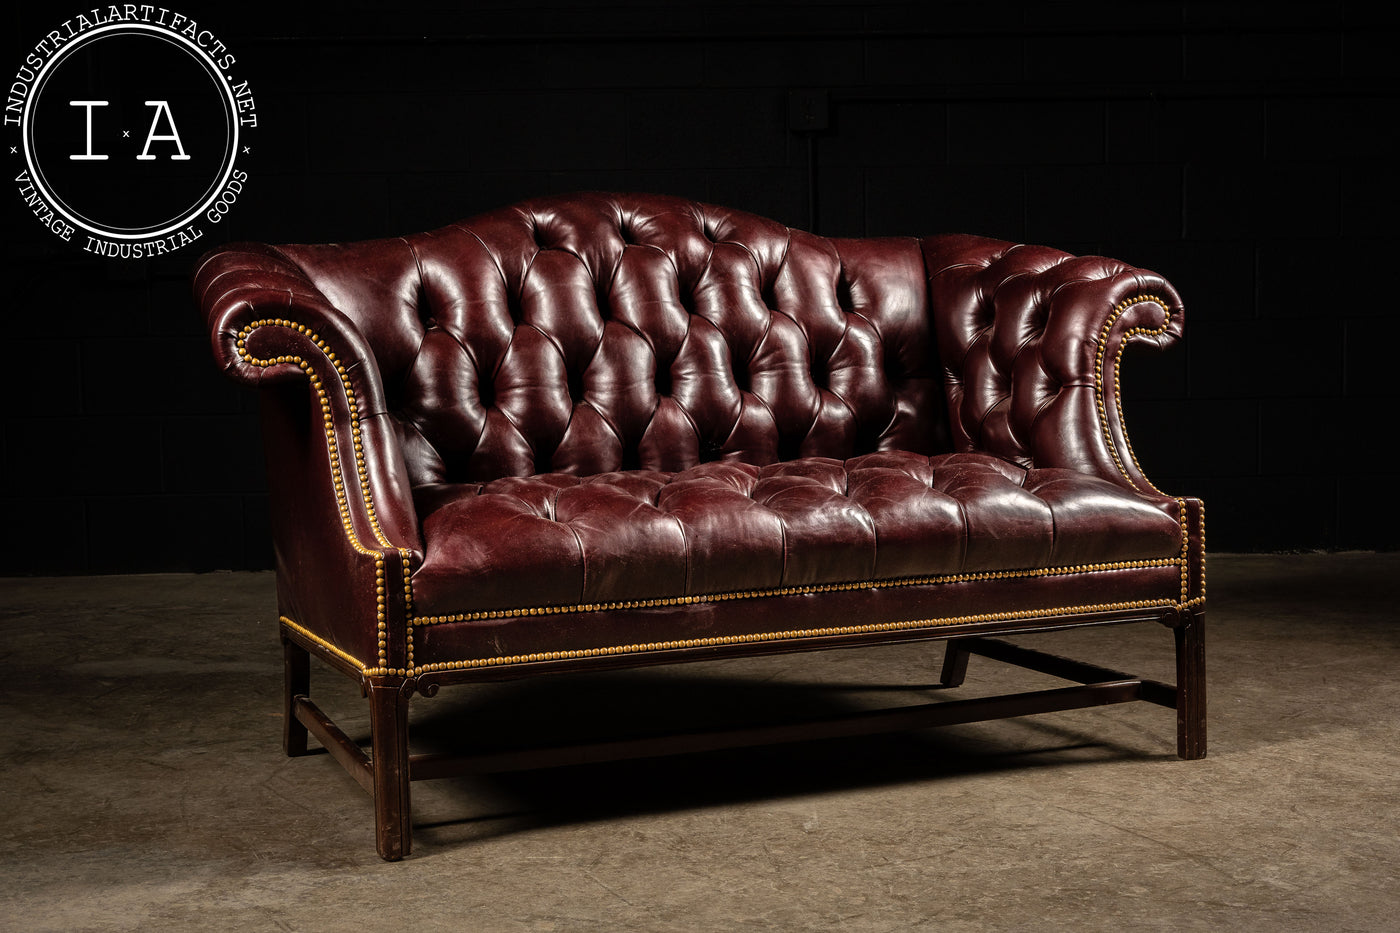 Vintage Tufted Leather Chippendale Style Sofa in Burgundy